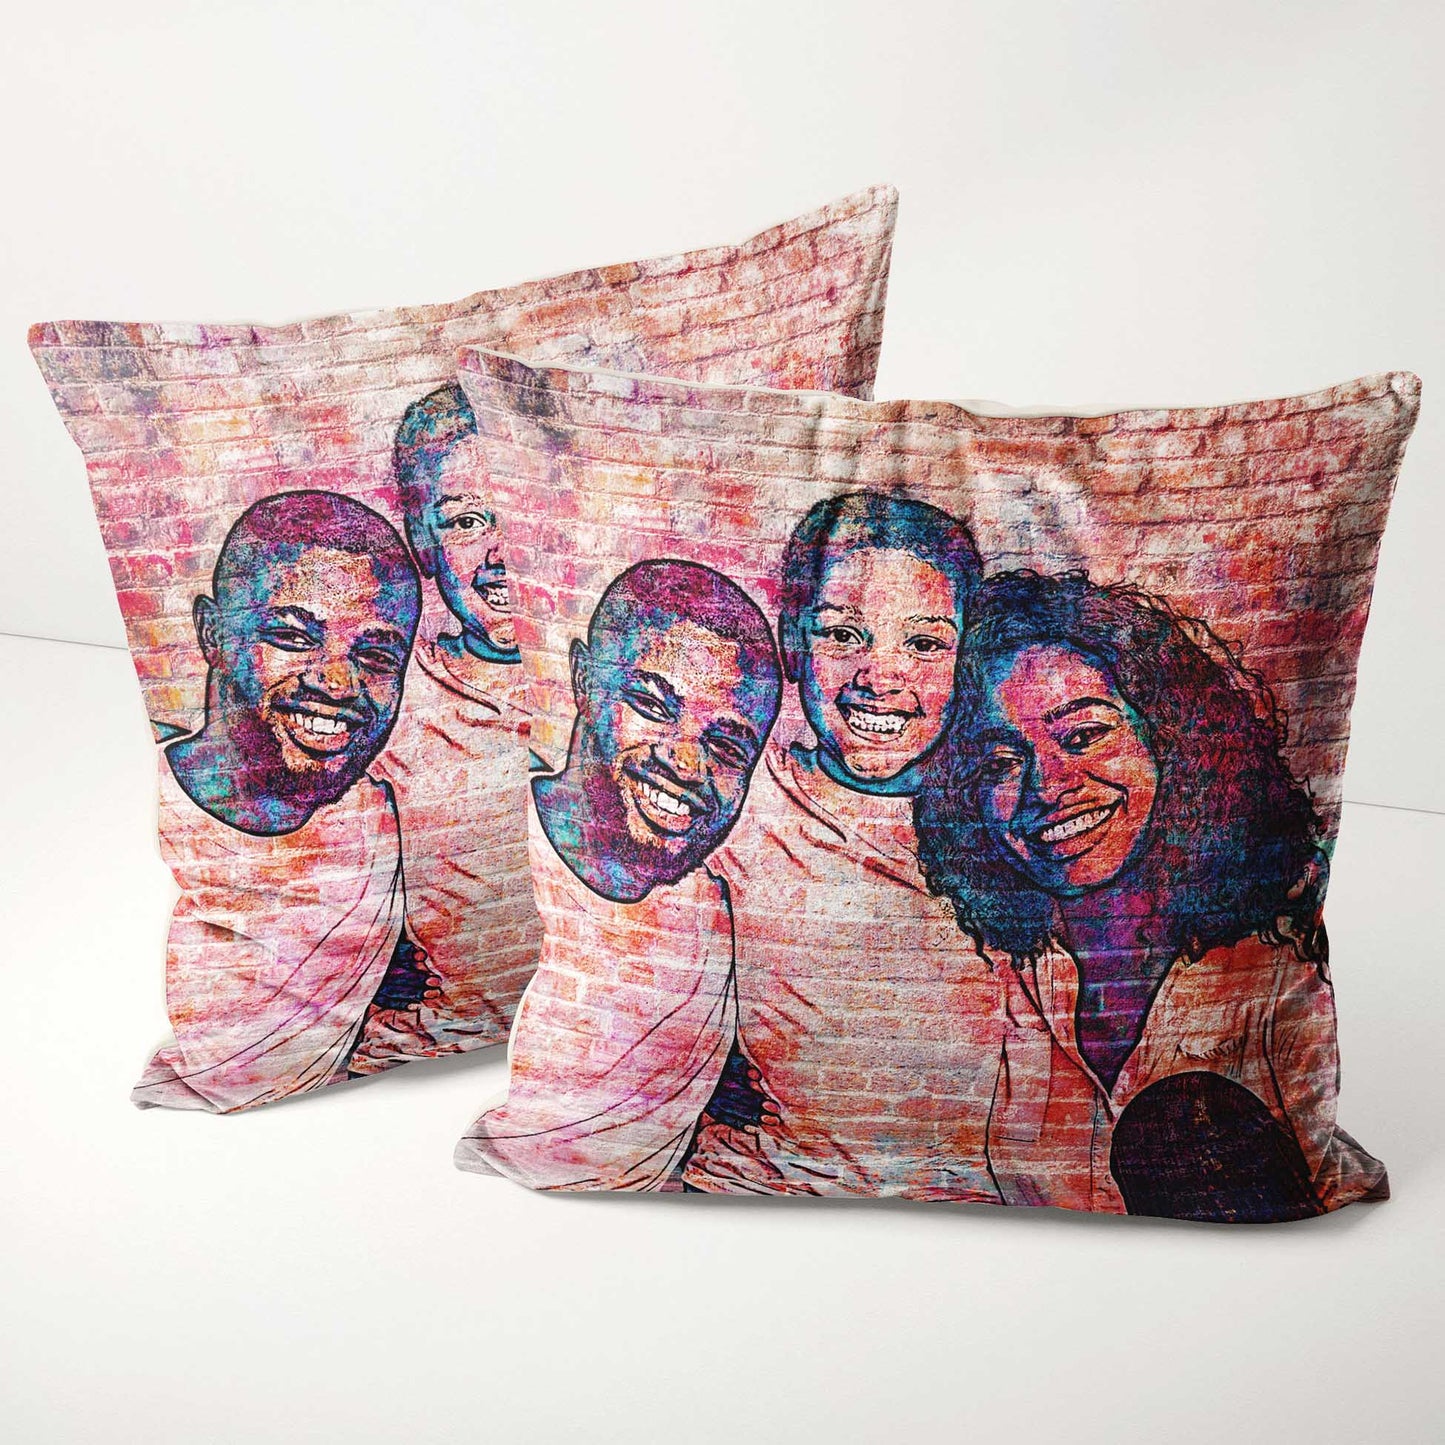 Immerse yourself in the world of urban art with the Personalised Brick Graffiti Street Art Cushion. Crafted with care and made from soft velvet, it offers a cozy and plush feel. Personalise it with a print from your photo